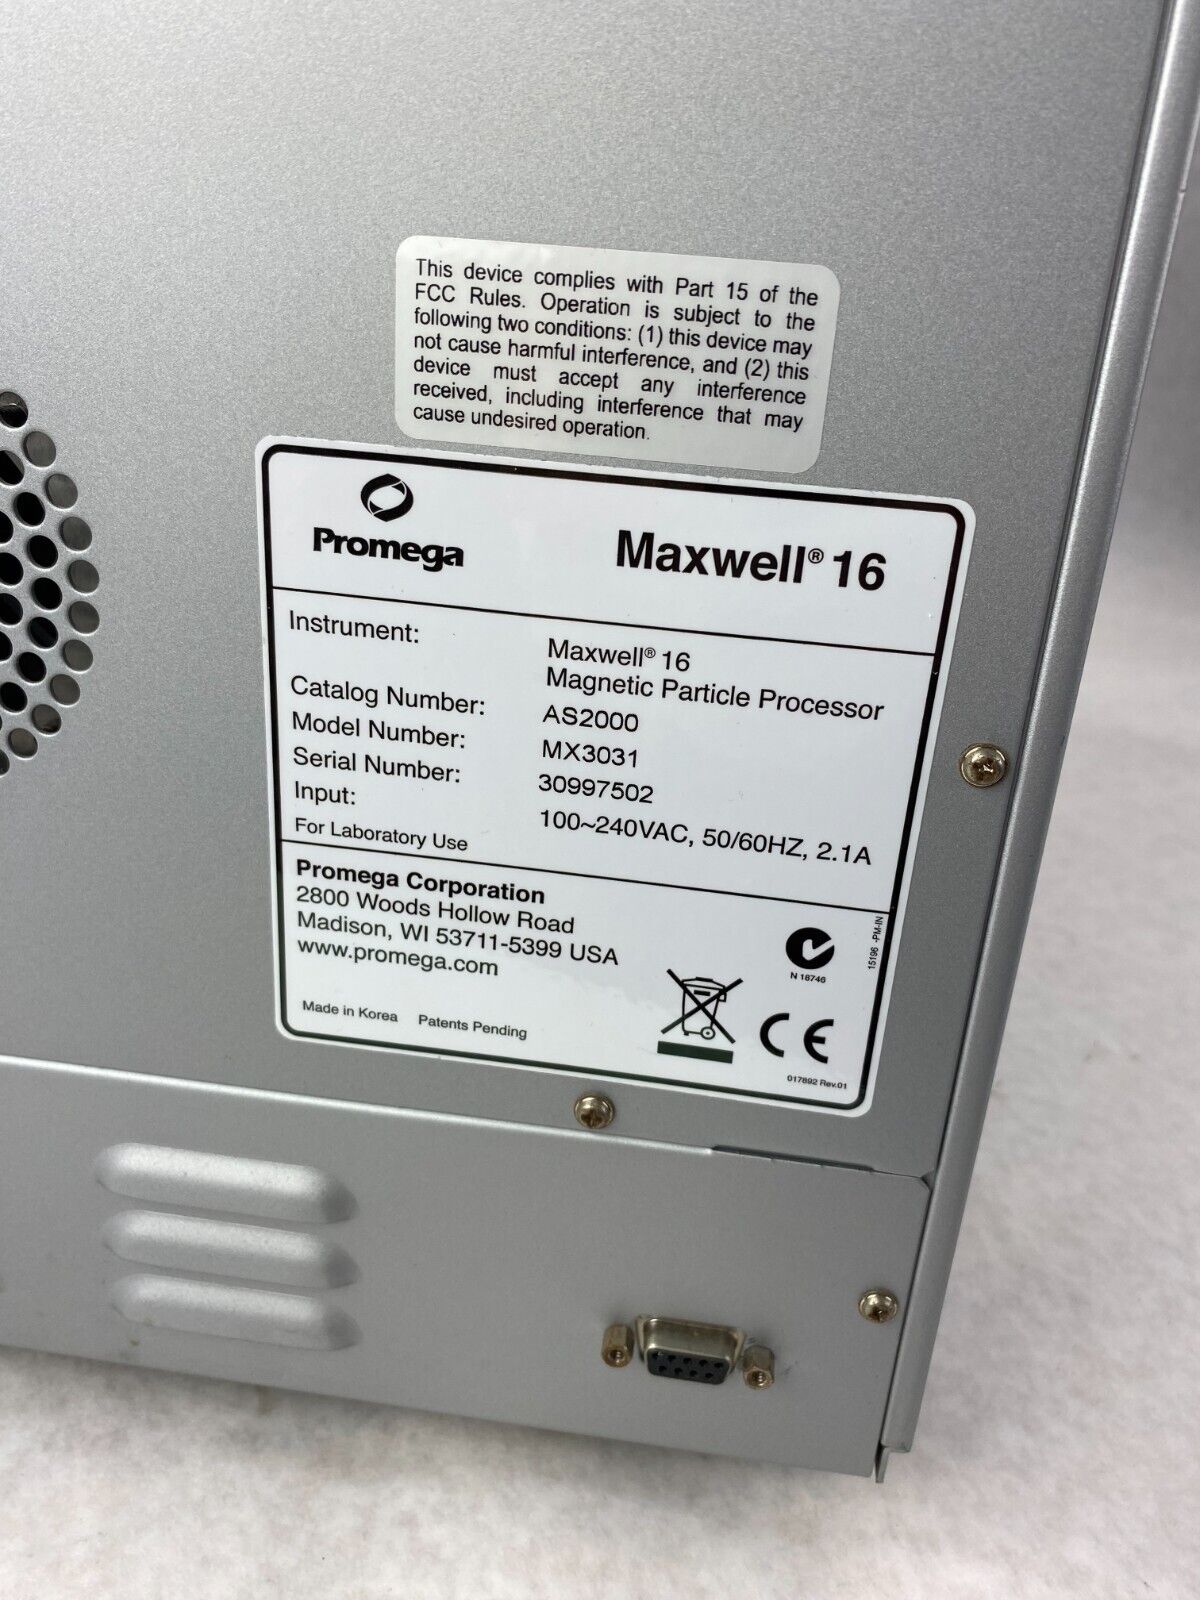 Promega Maxwell 16 AS2000 Magnetic Particle Processor